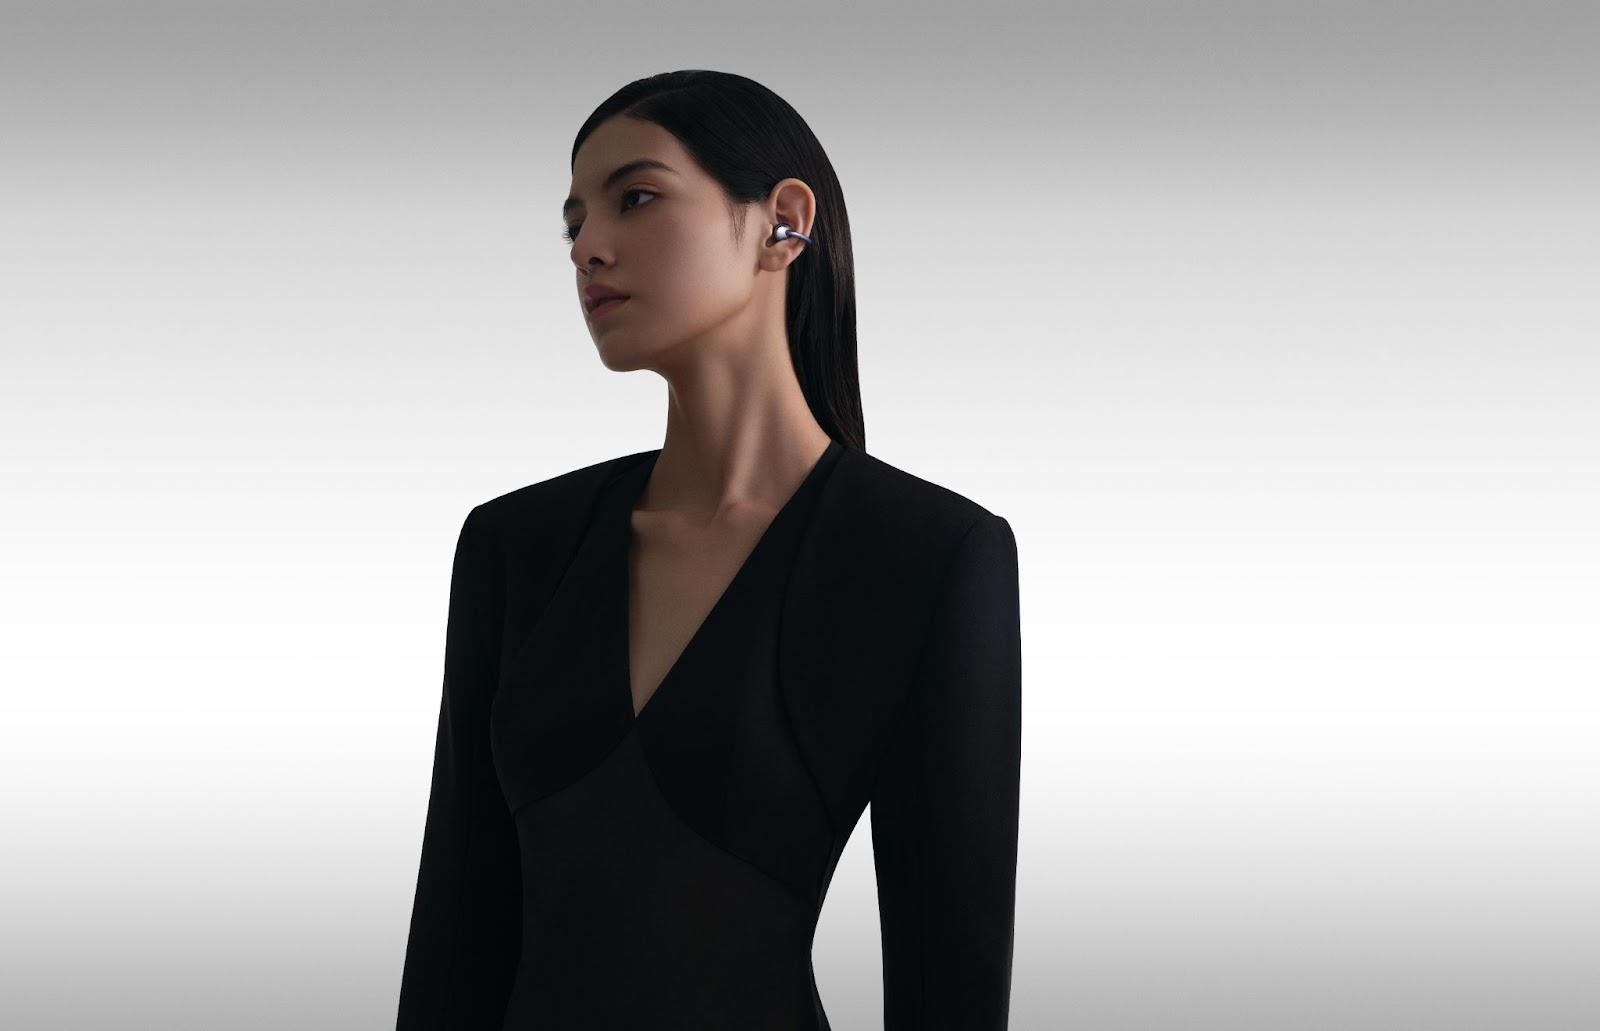 A person in a black dress

Description automatically generated